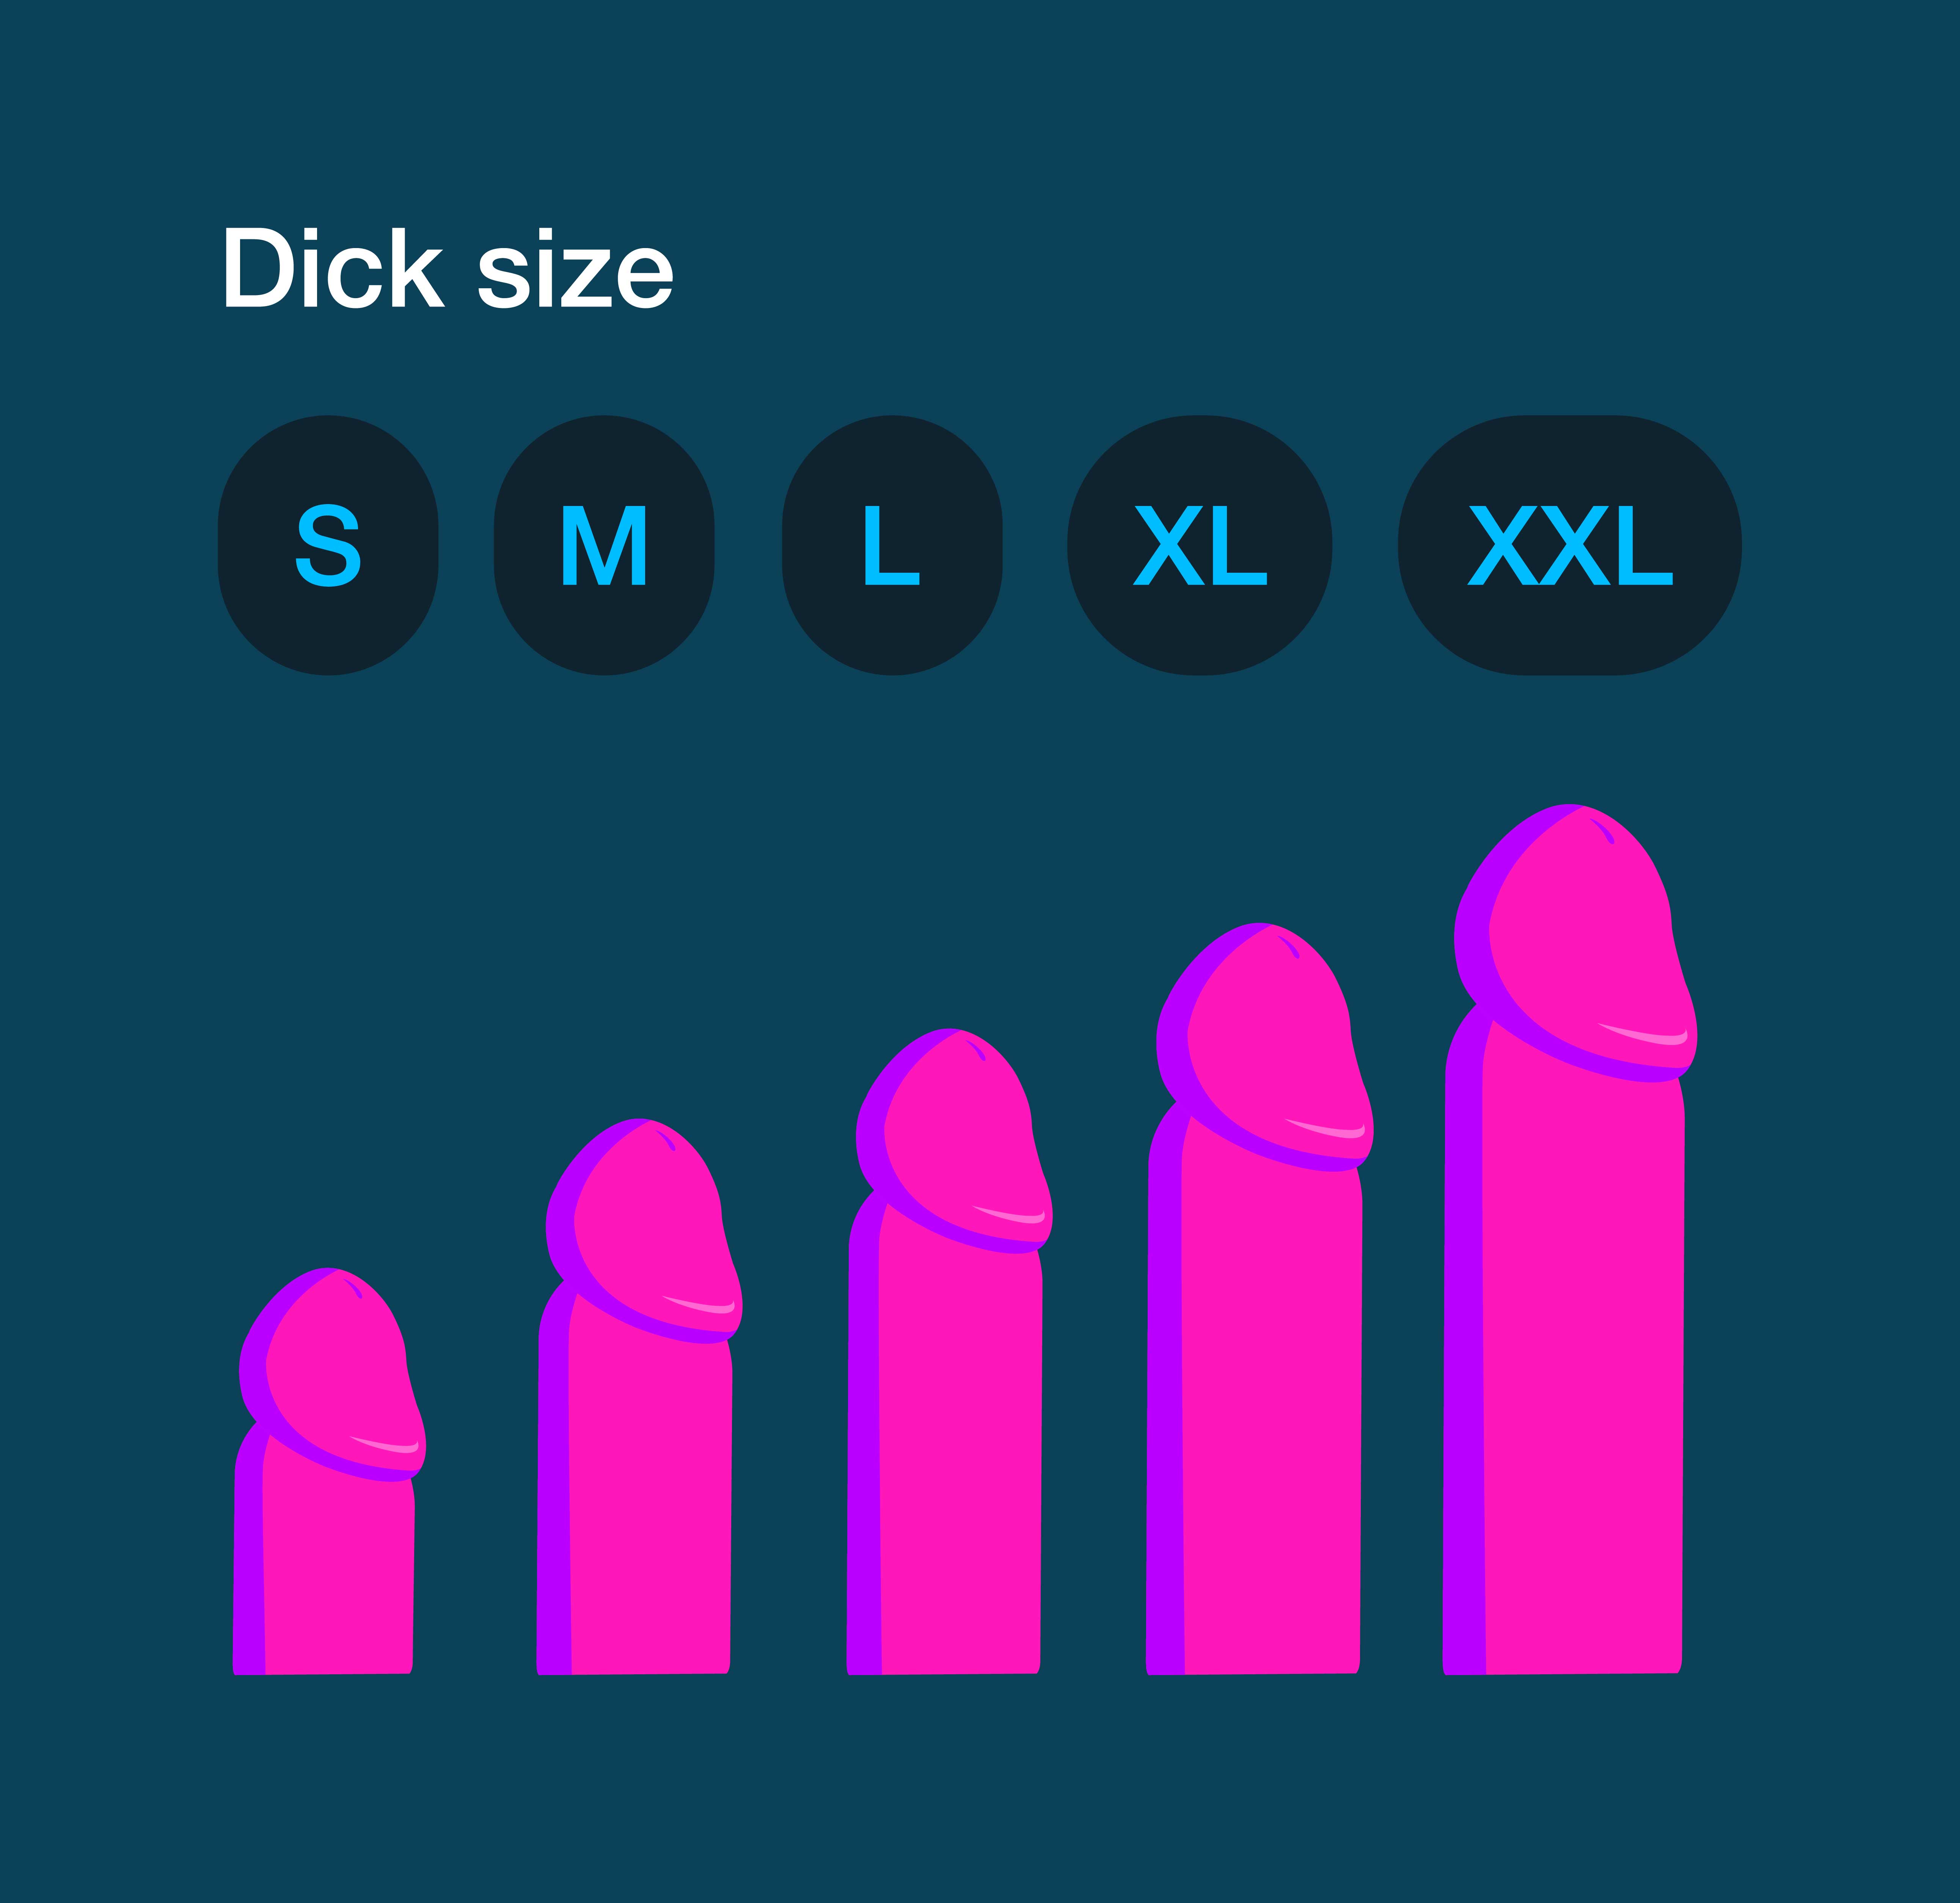 Most liked dick size